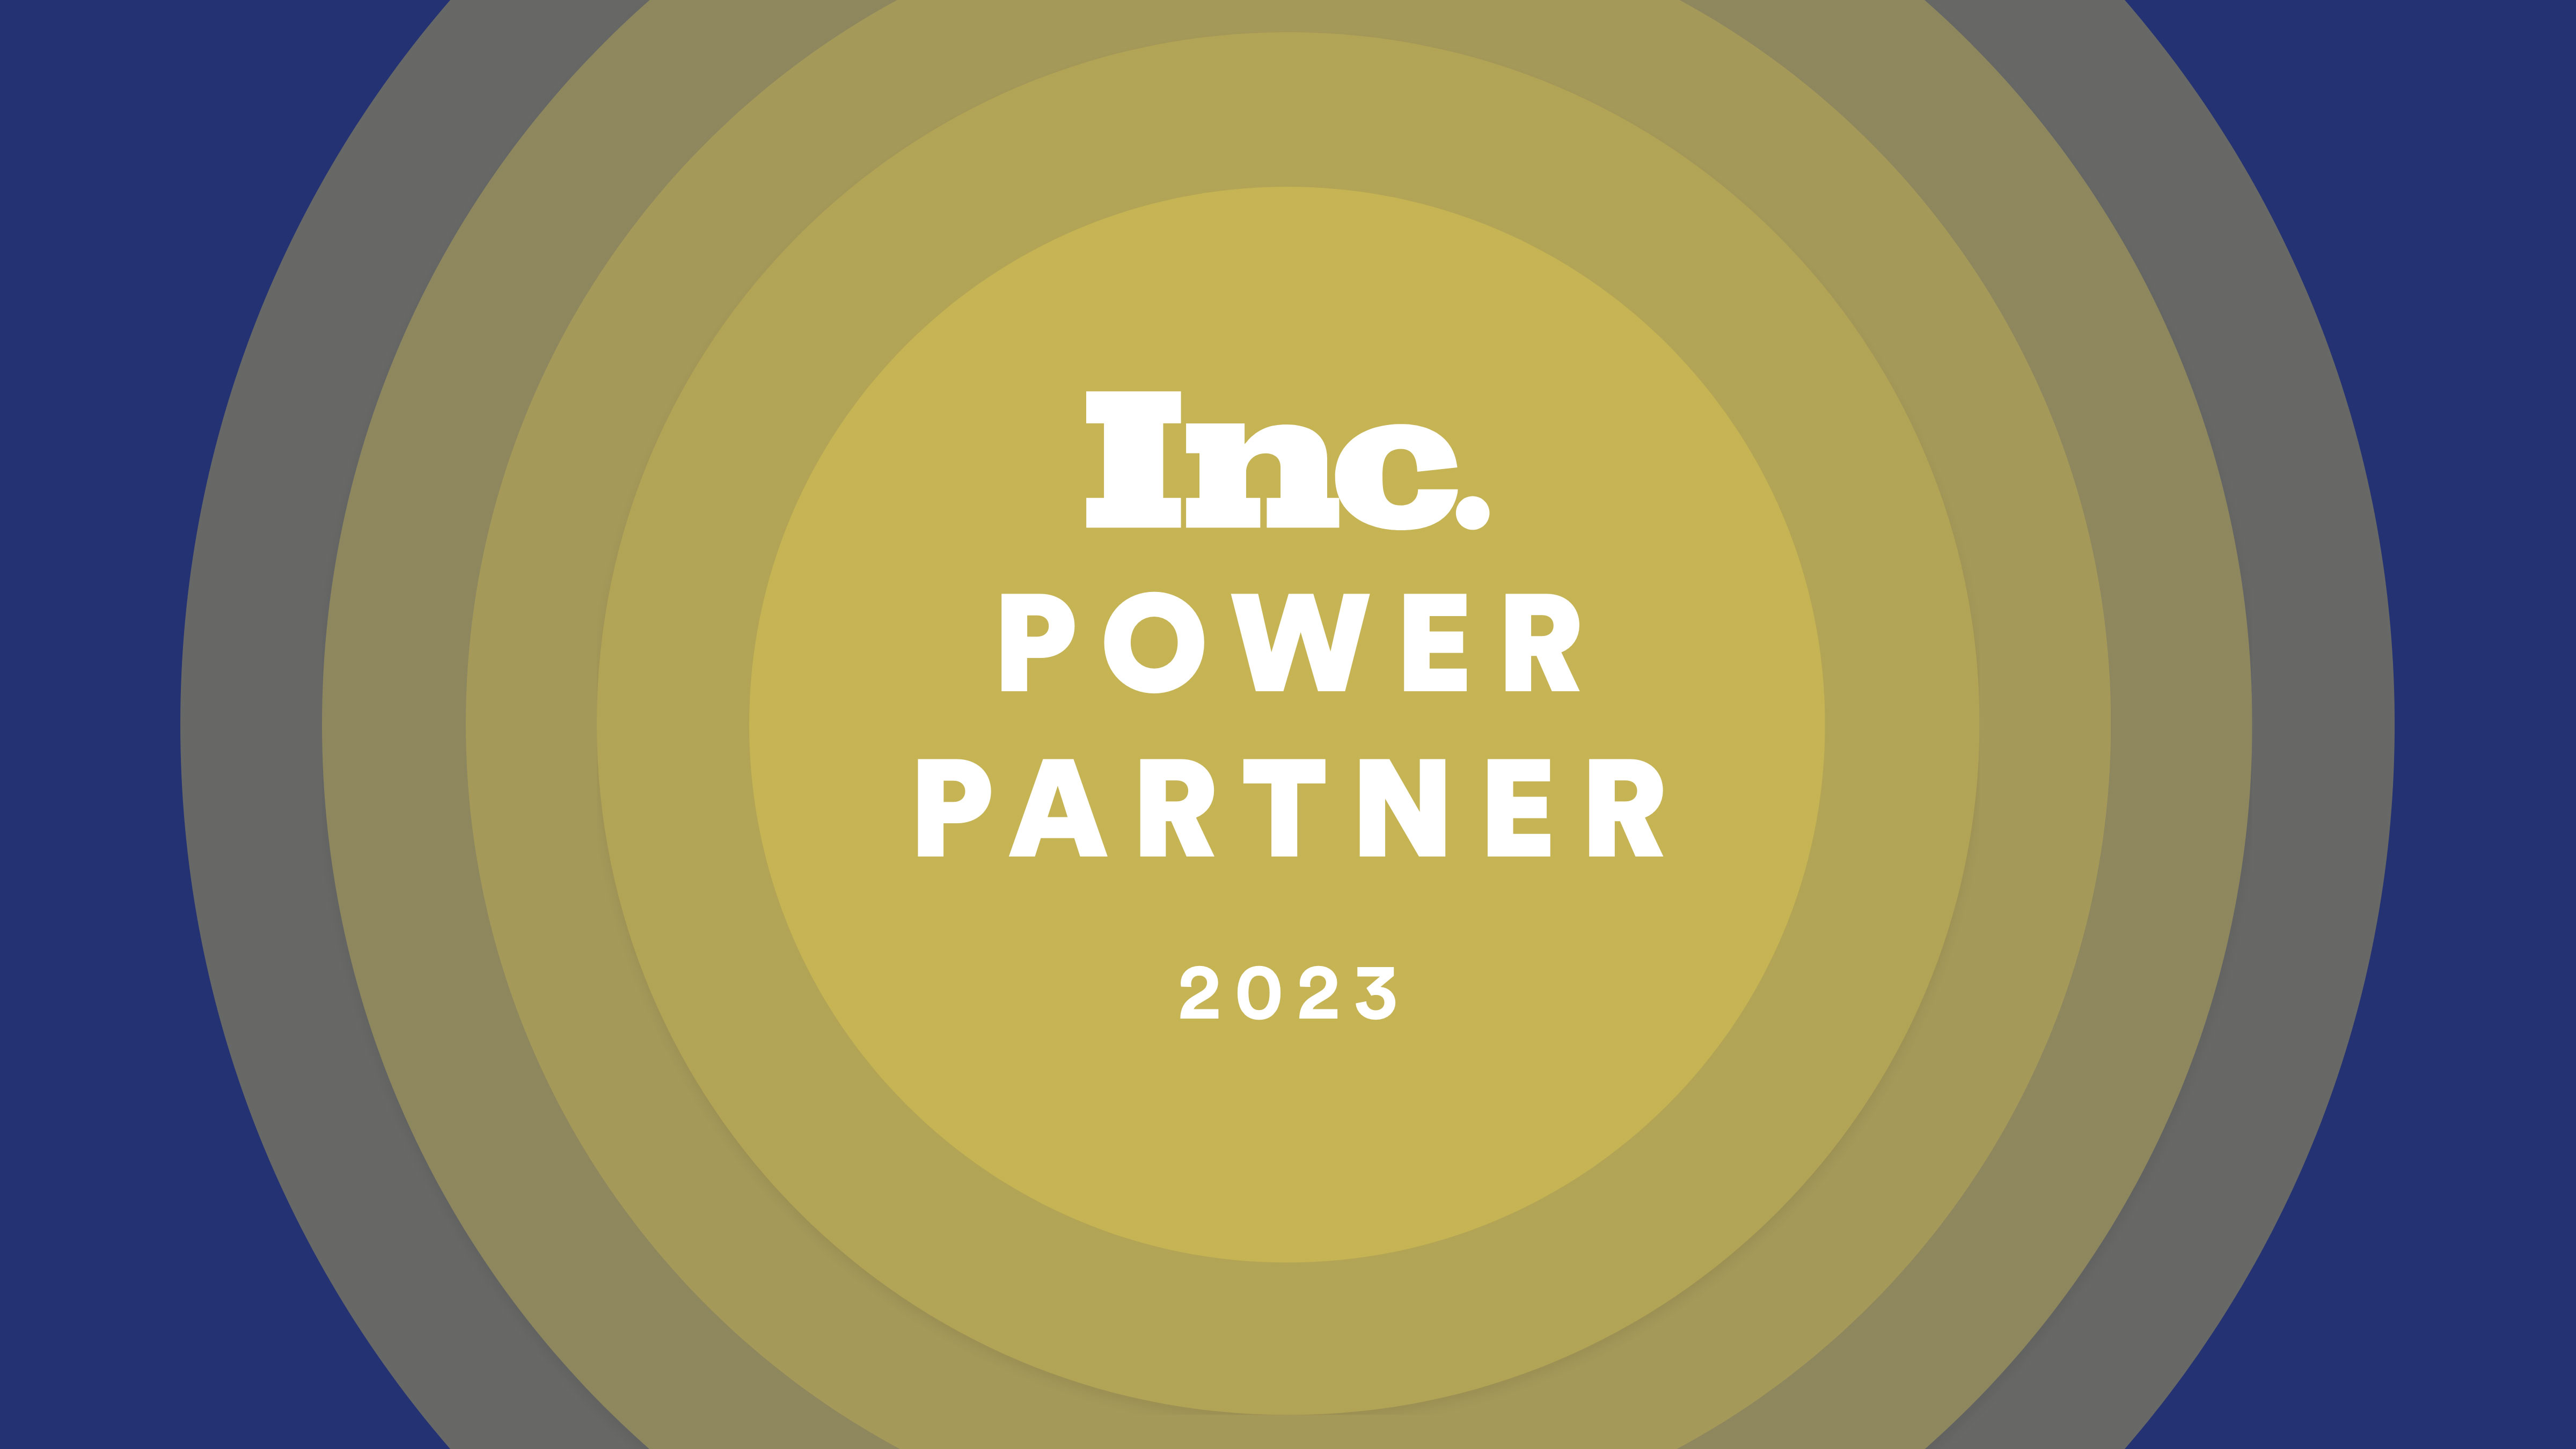 MEDC named Inc. Power Partner for game-changing small business support